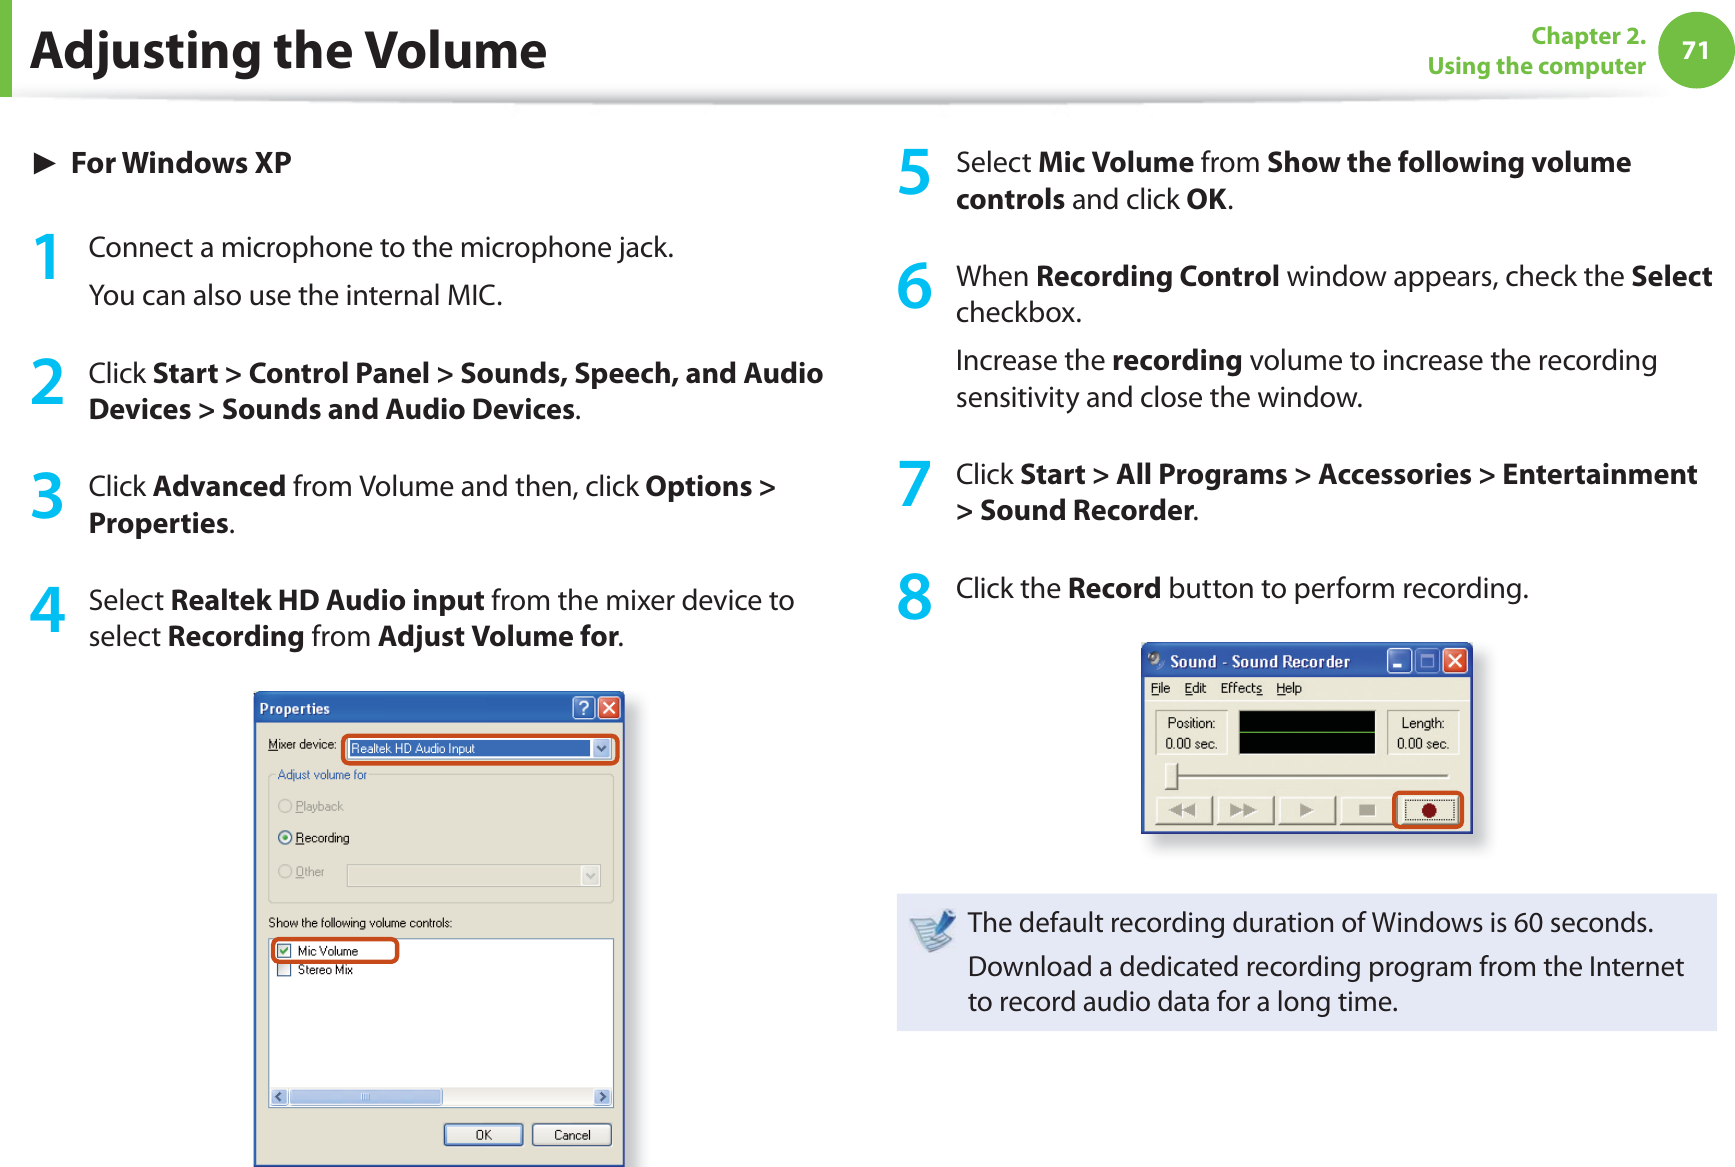 71Chapter 2. Using the computer► For Windows XP1  Connect a microphone to the microphone jack.You can also use the internal MIC.2 Click Start &gt; Control Panel &gt; Sounds, Speech, and Audio Devices &gt; Sounds and Audio Devices.3 Click Advanced from Volume and then, click Options &gt; Properties.4 Select Realtek HD Audio input from the mixer device to select Recording from Adjust Volume for.5 Select Mic Volume from Show the following volume controls and click OK.6 When Recording Control window appears, check the Select checkbox.Increase the recording volume to increase the recording sensitivity and close the window.7 Click Start &gt; All Programs &gt; Accessories &gt; Entertainment &gt; Sound Recorder.8 Click the Record button to perform recording.The default recording duration of Windows is 60 seconds.Download a dedicated recording program from the Internet to record audio data for a long time.Adjusting the Volume